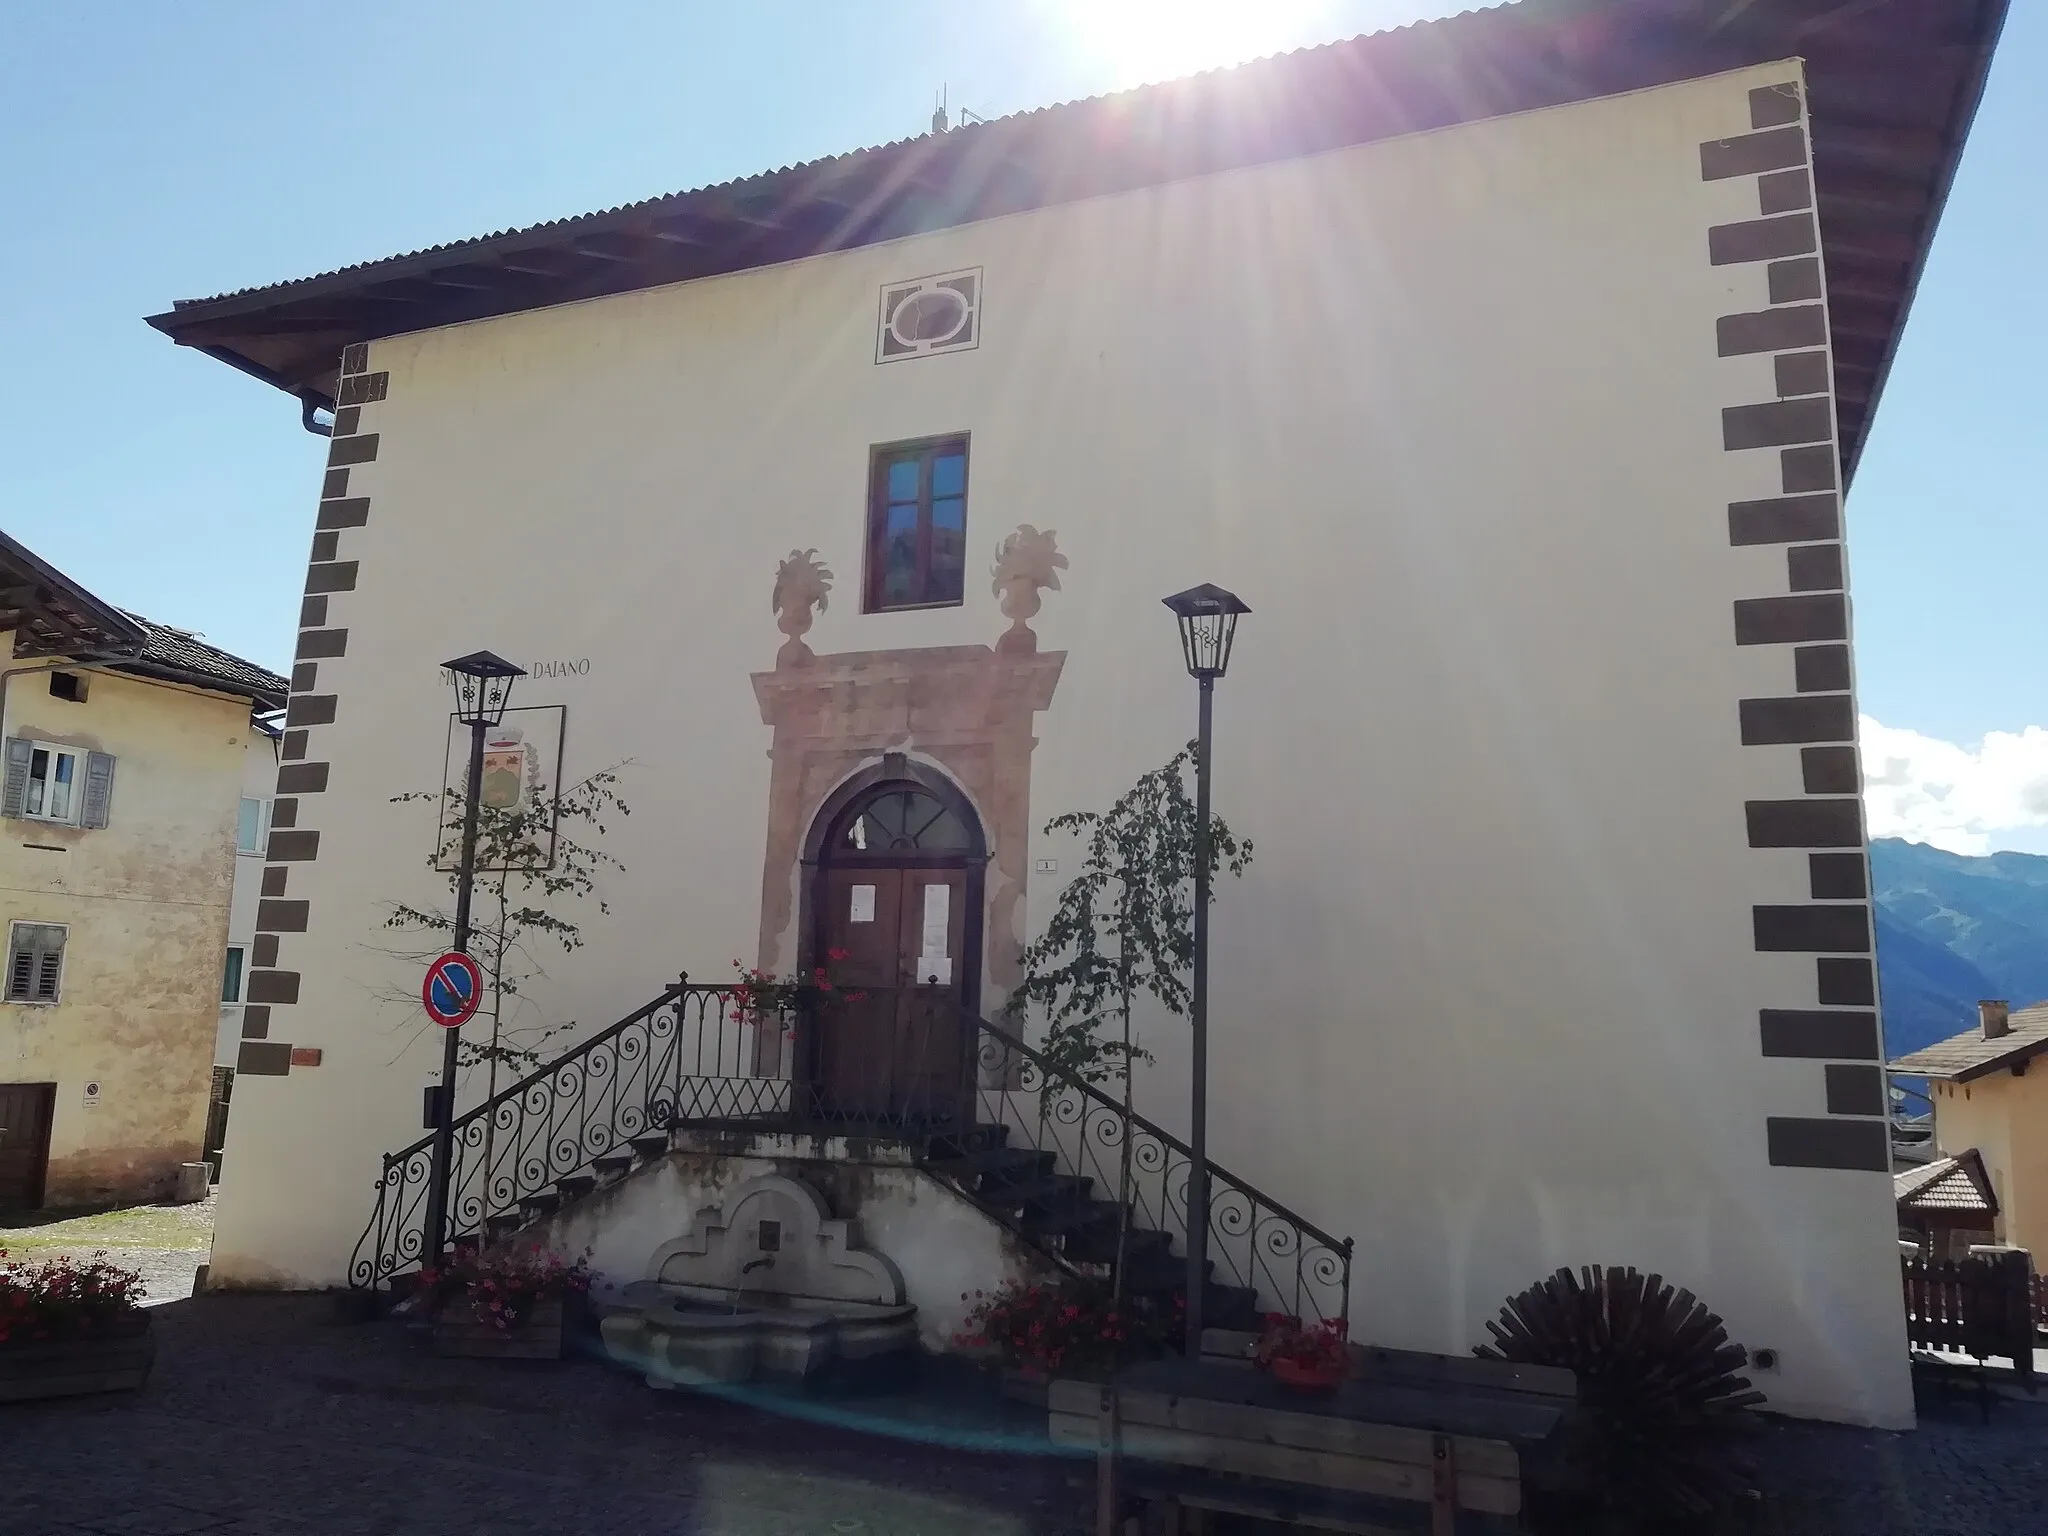 Photo showing: townhall of Daiano